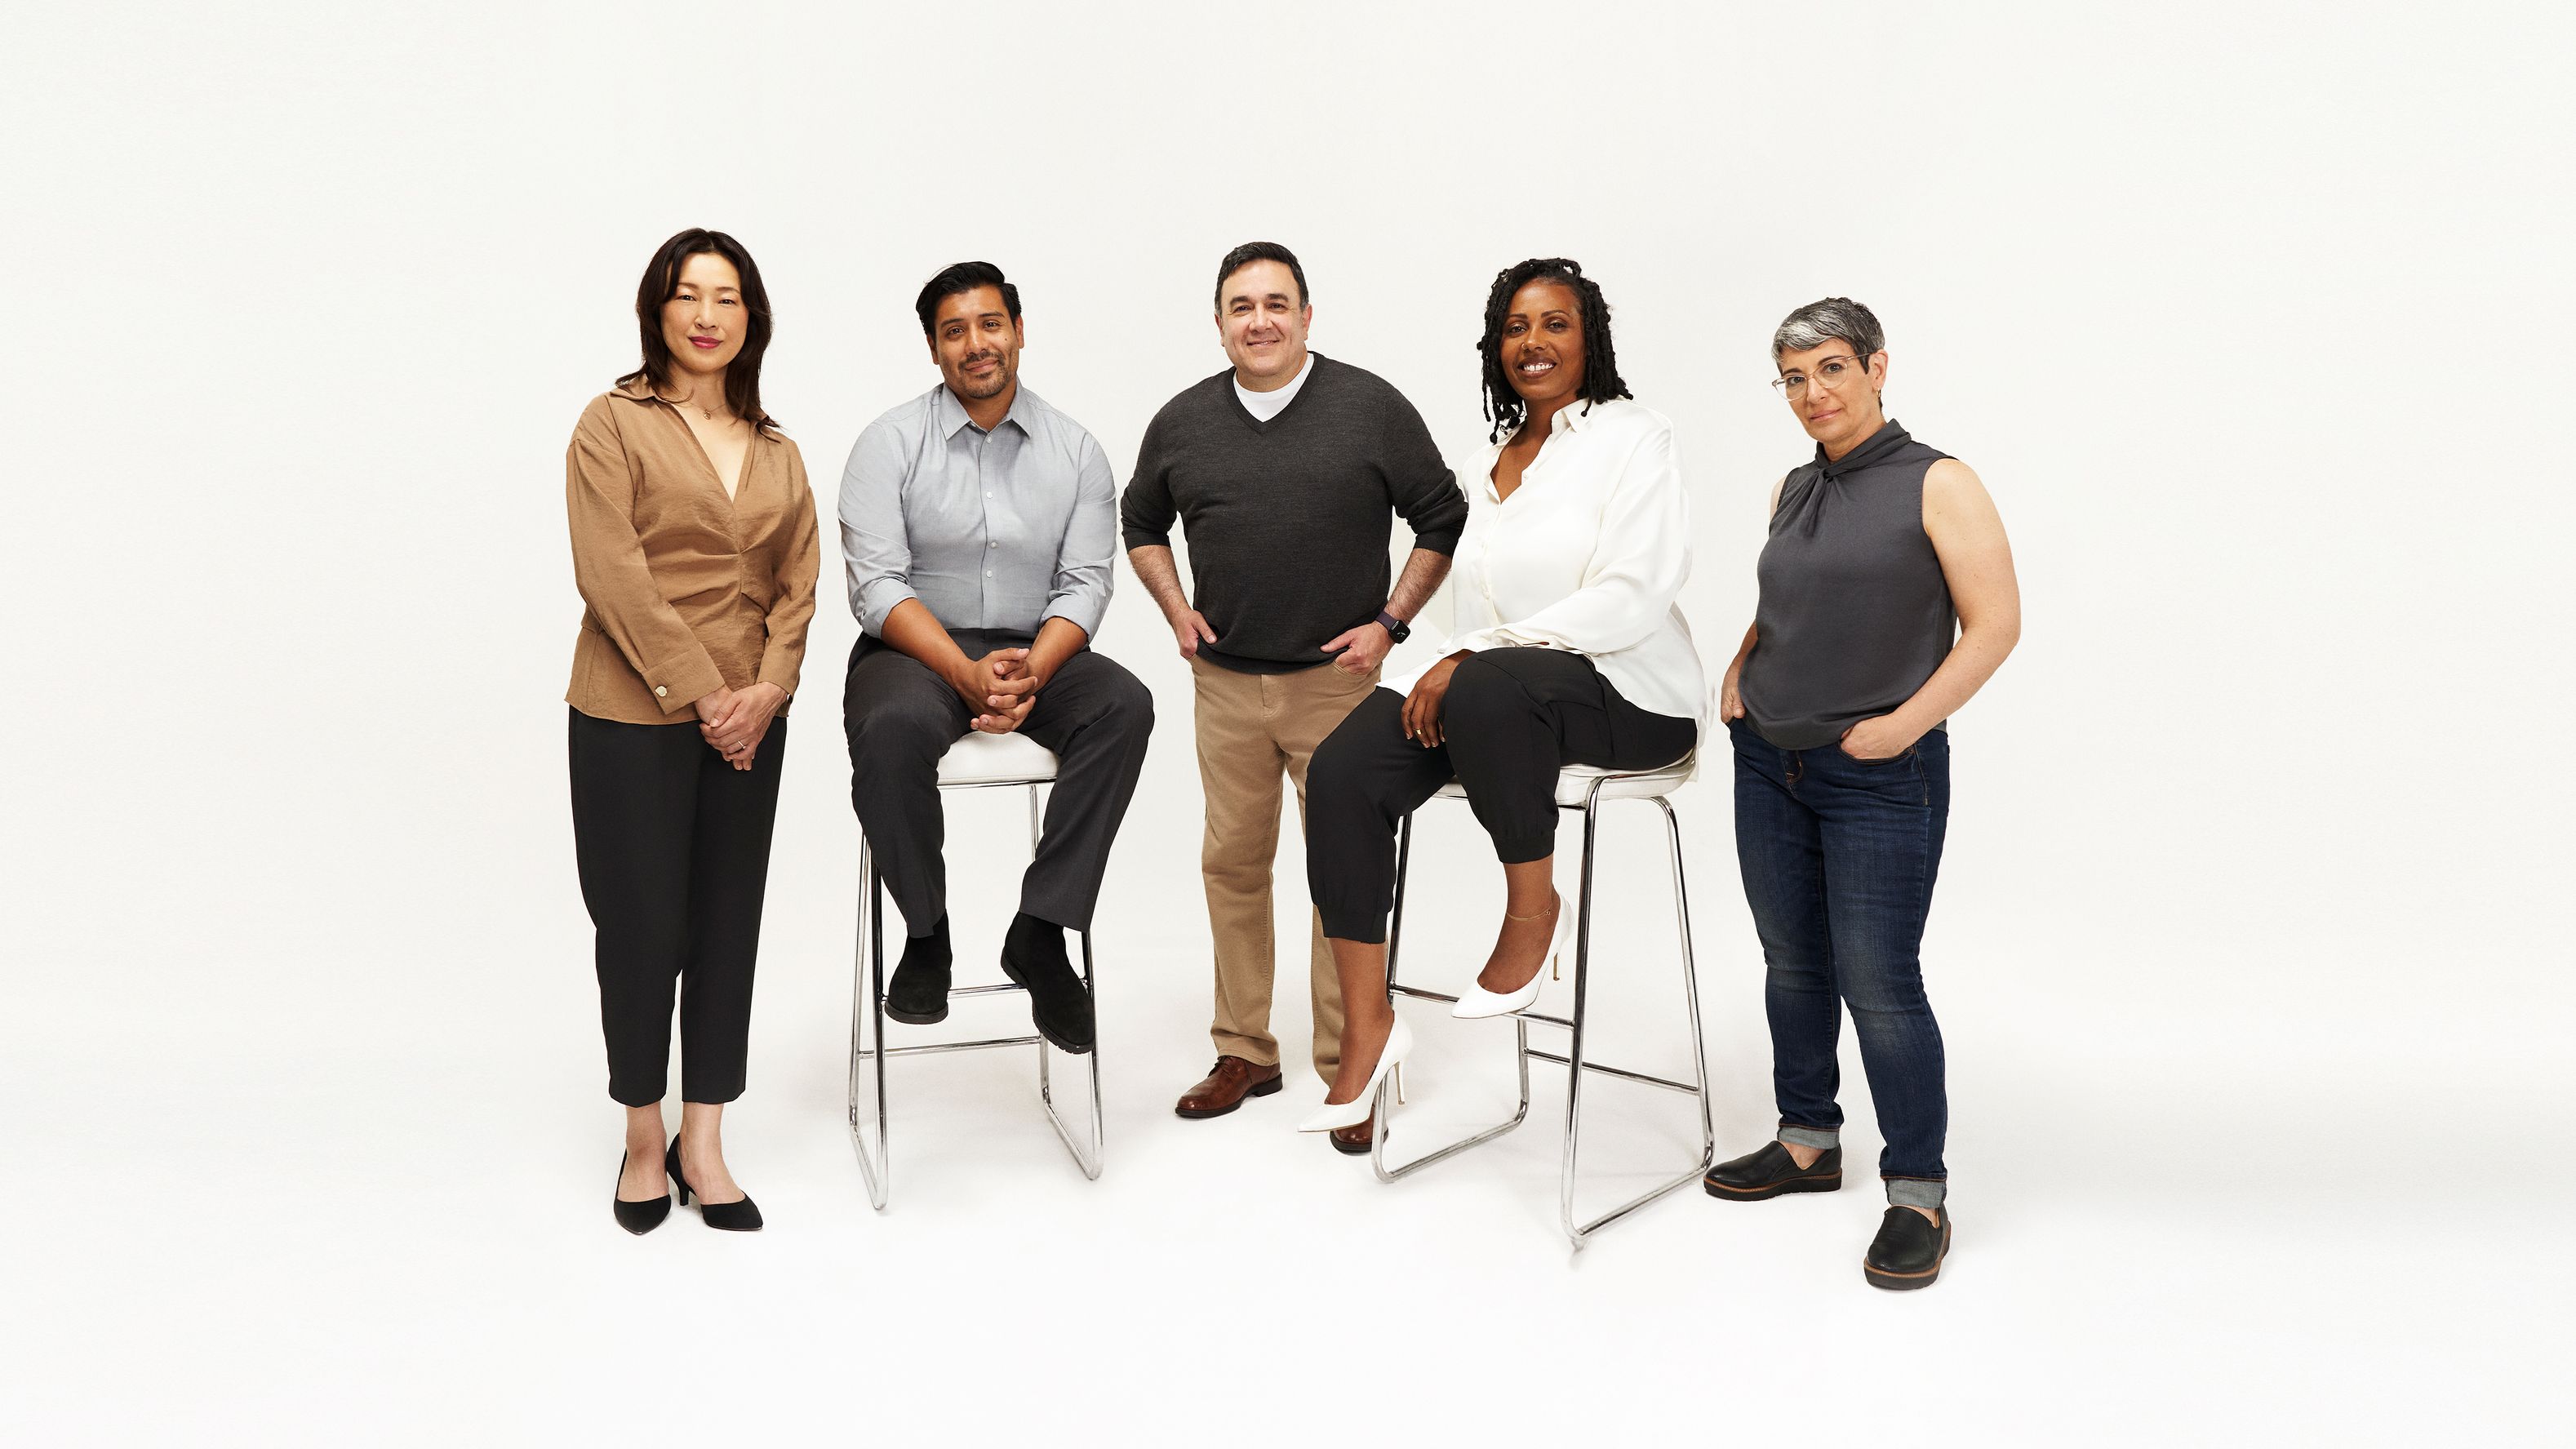 Team photo of five people in white background